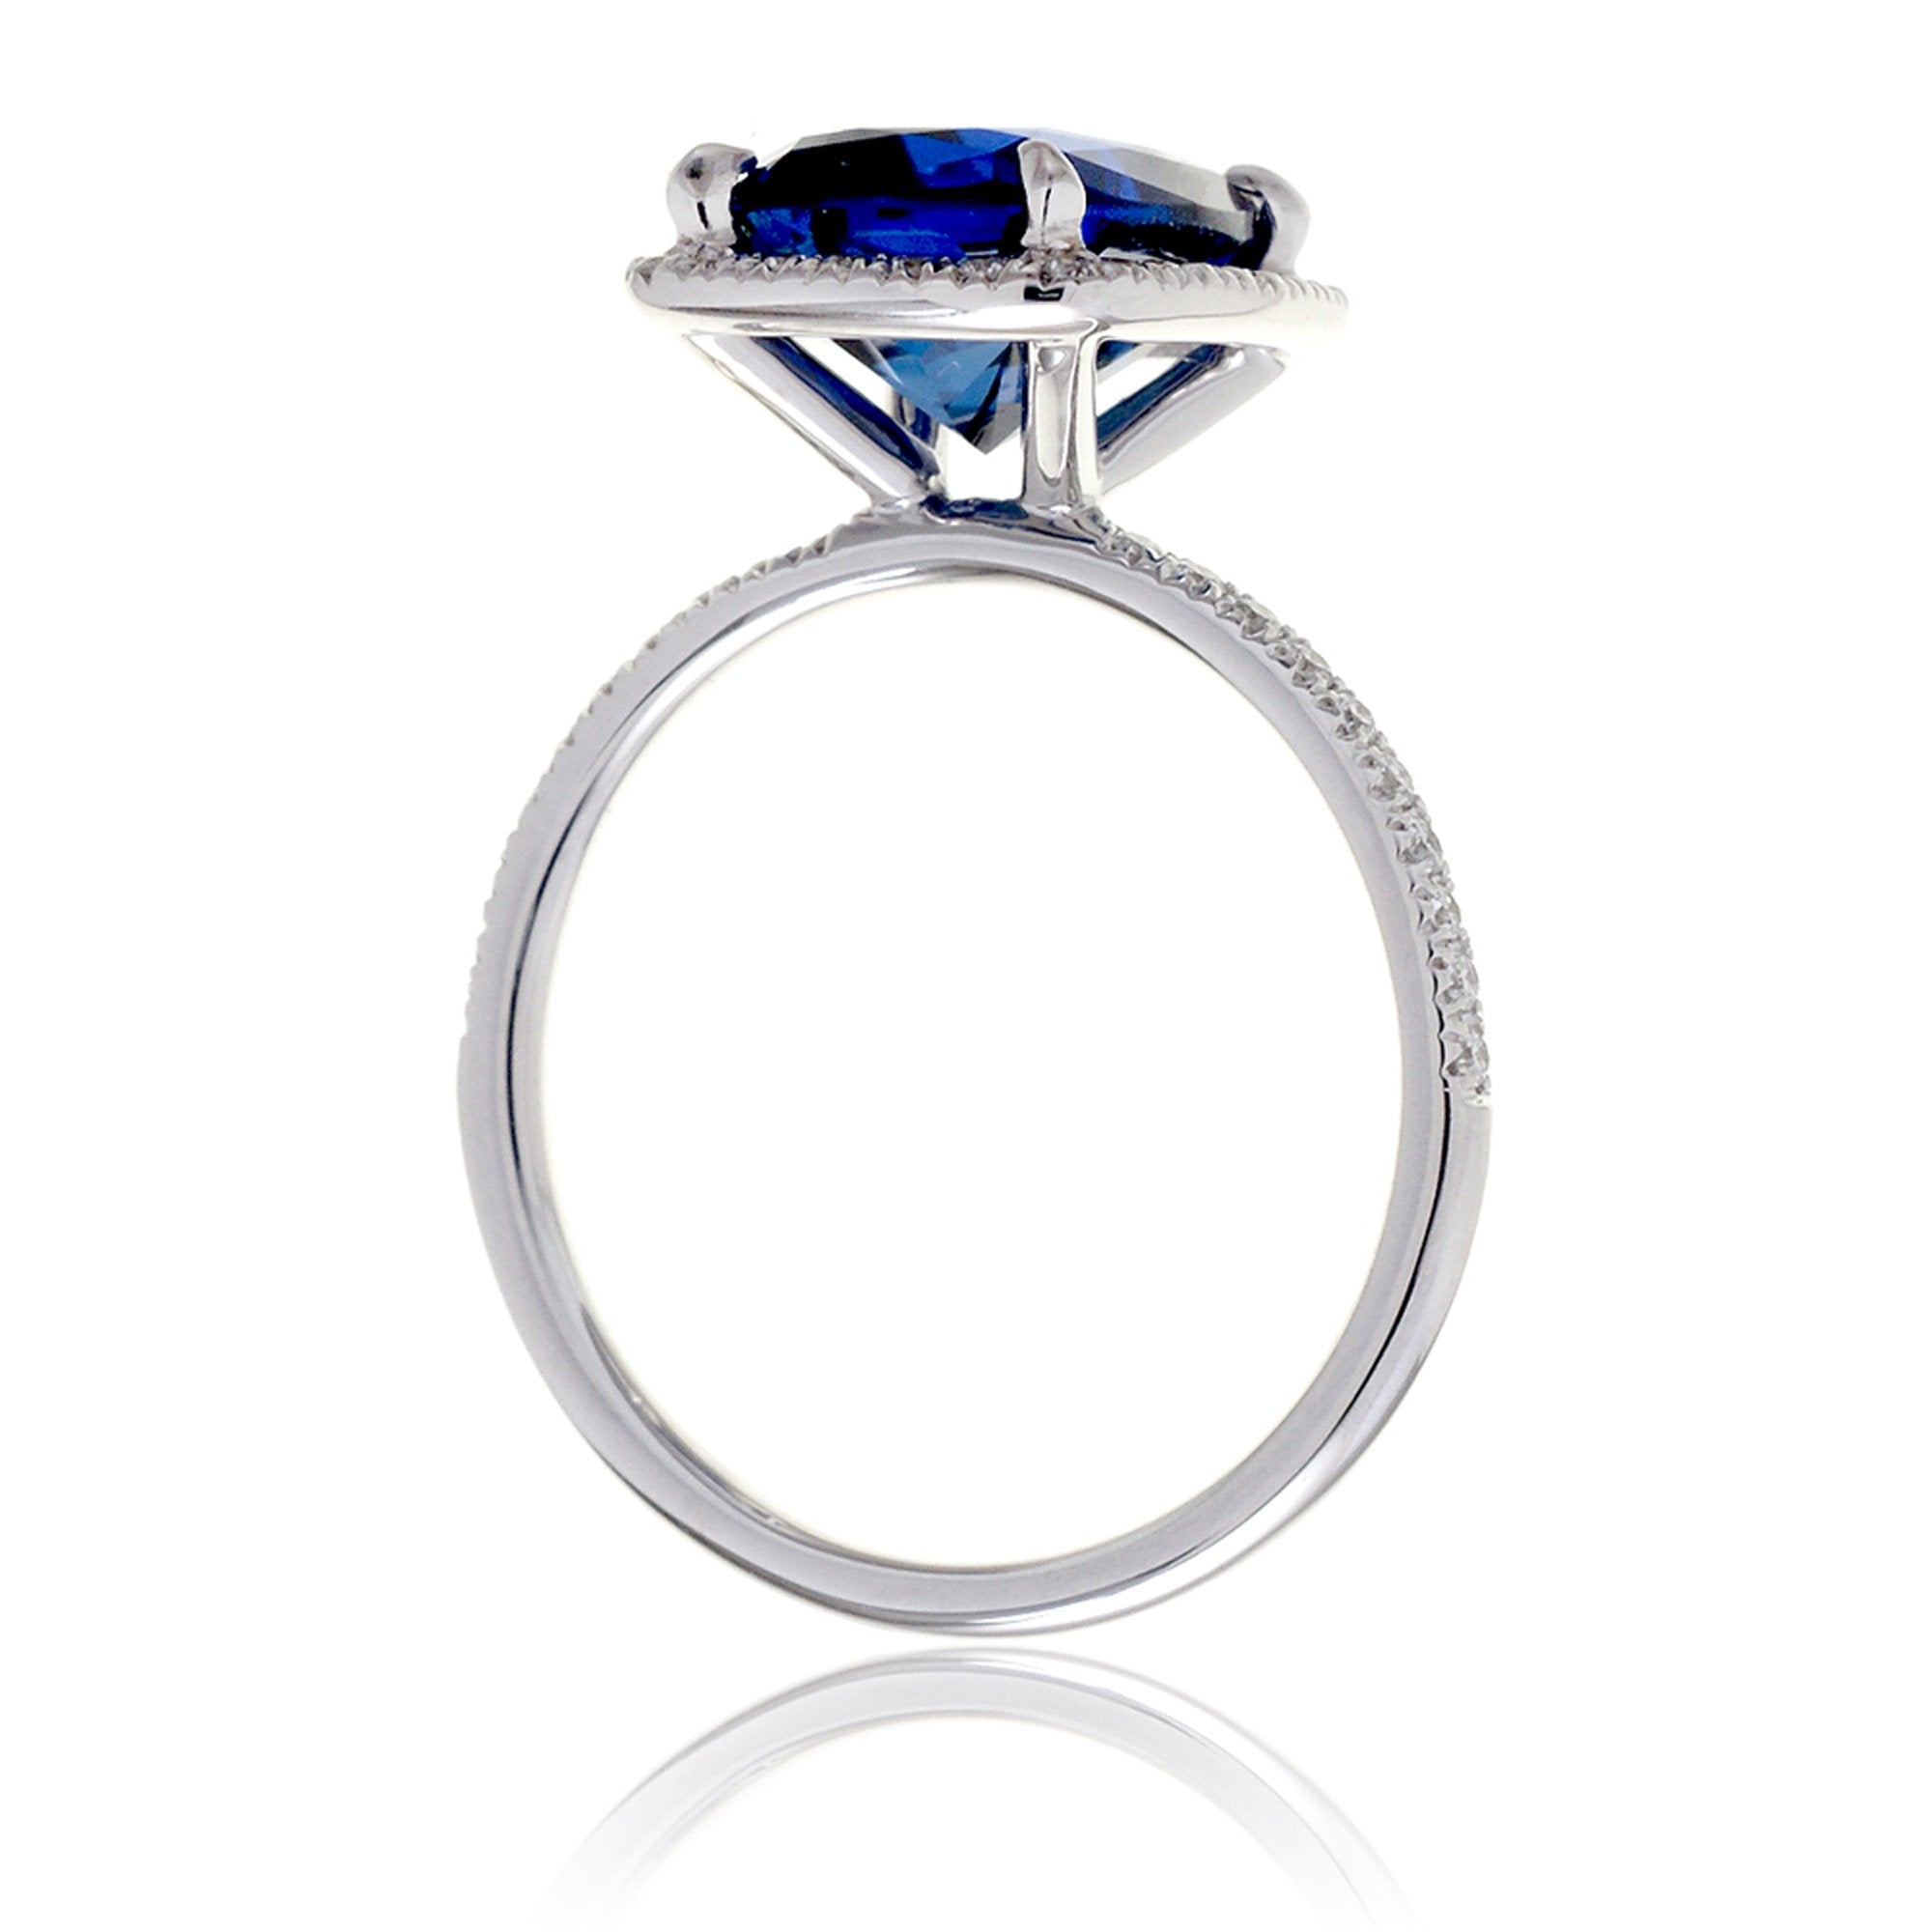 Cushion Sapphire Engagement Ring With A Diamond Halo | The Caitlin Ring In White Gold